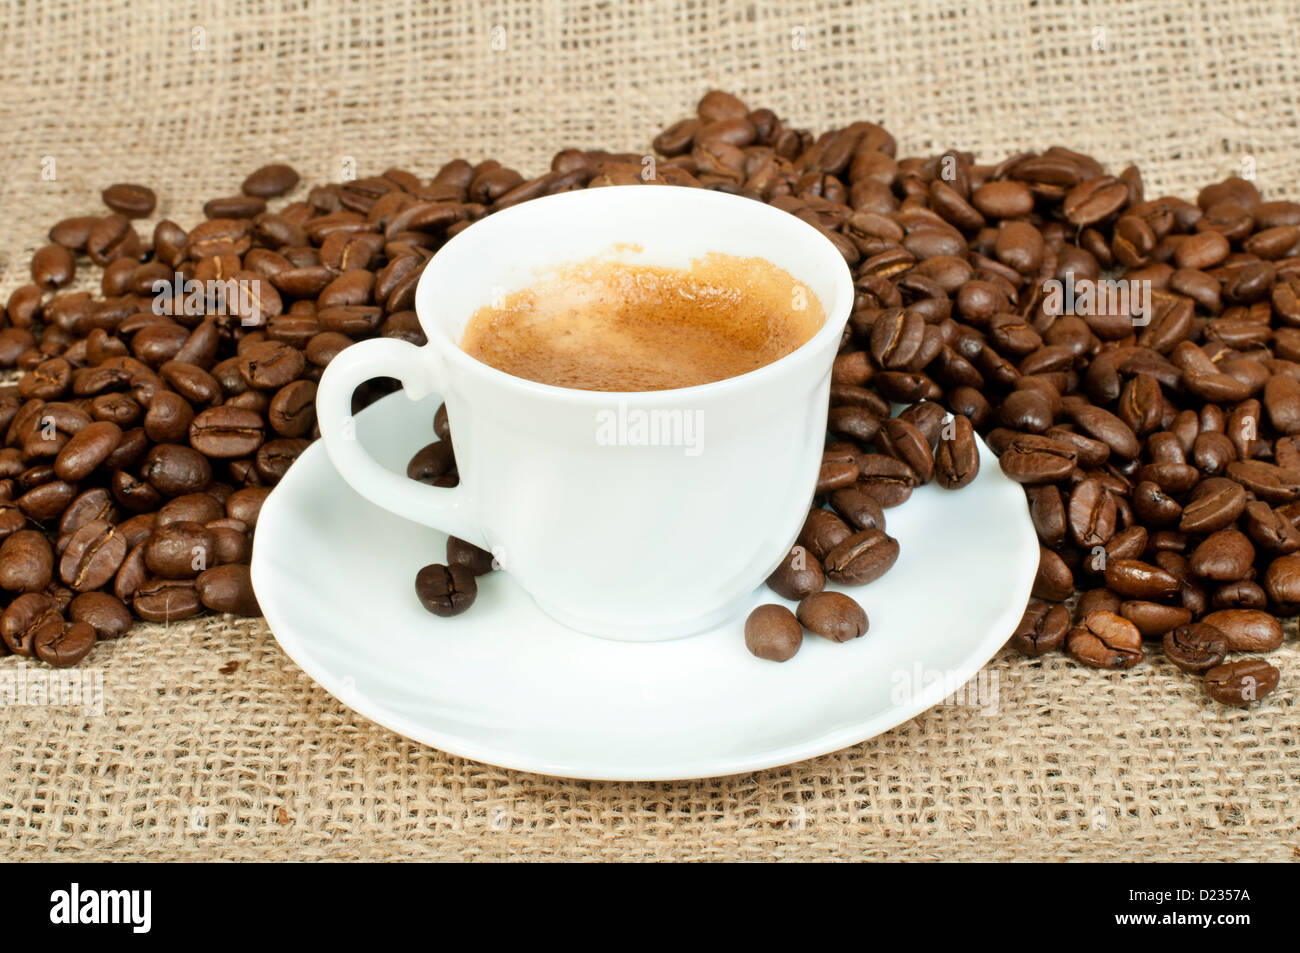 Cup of coffee and coffee beans on burlap Stock Photo